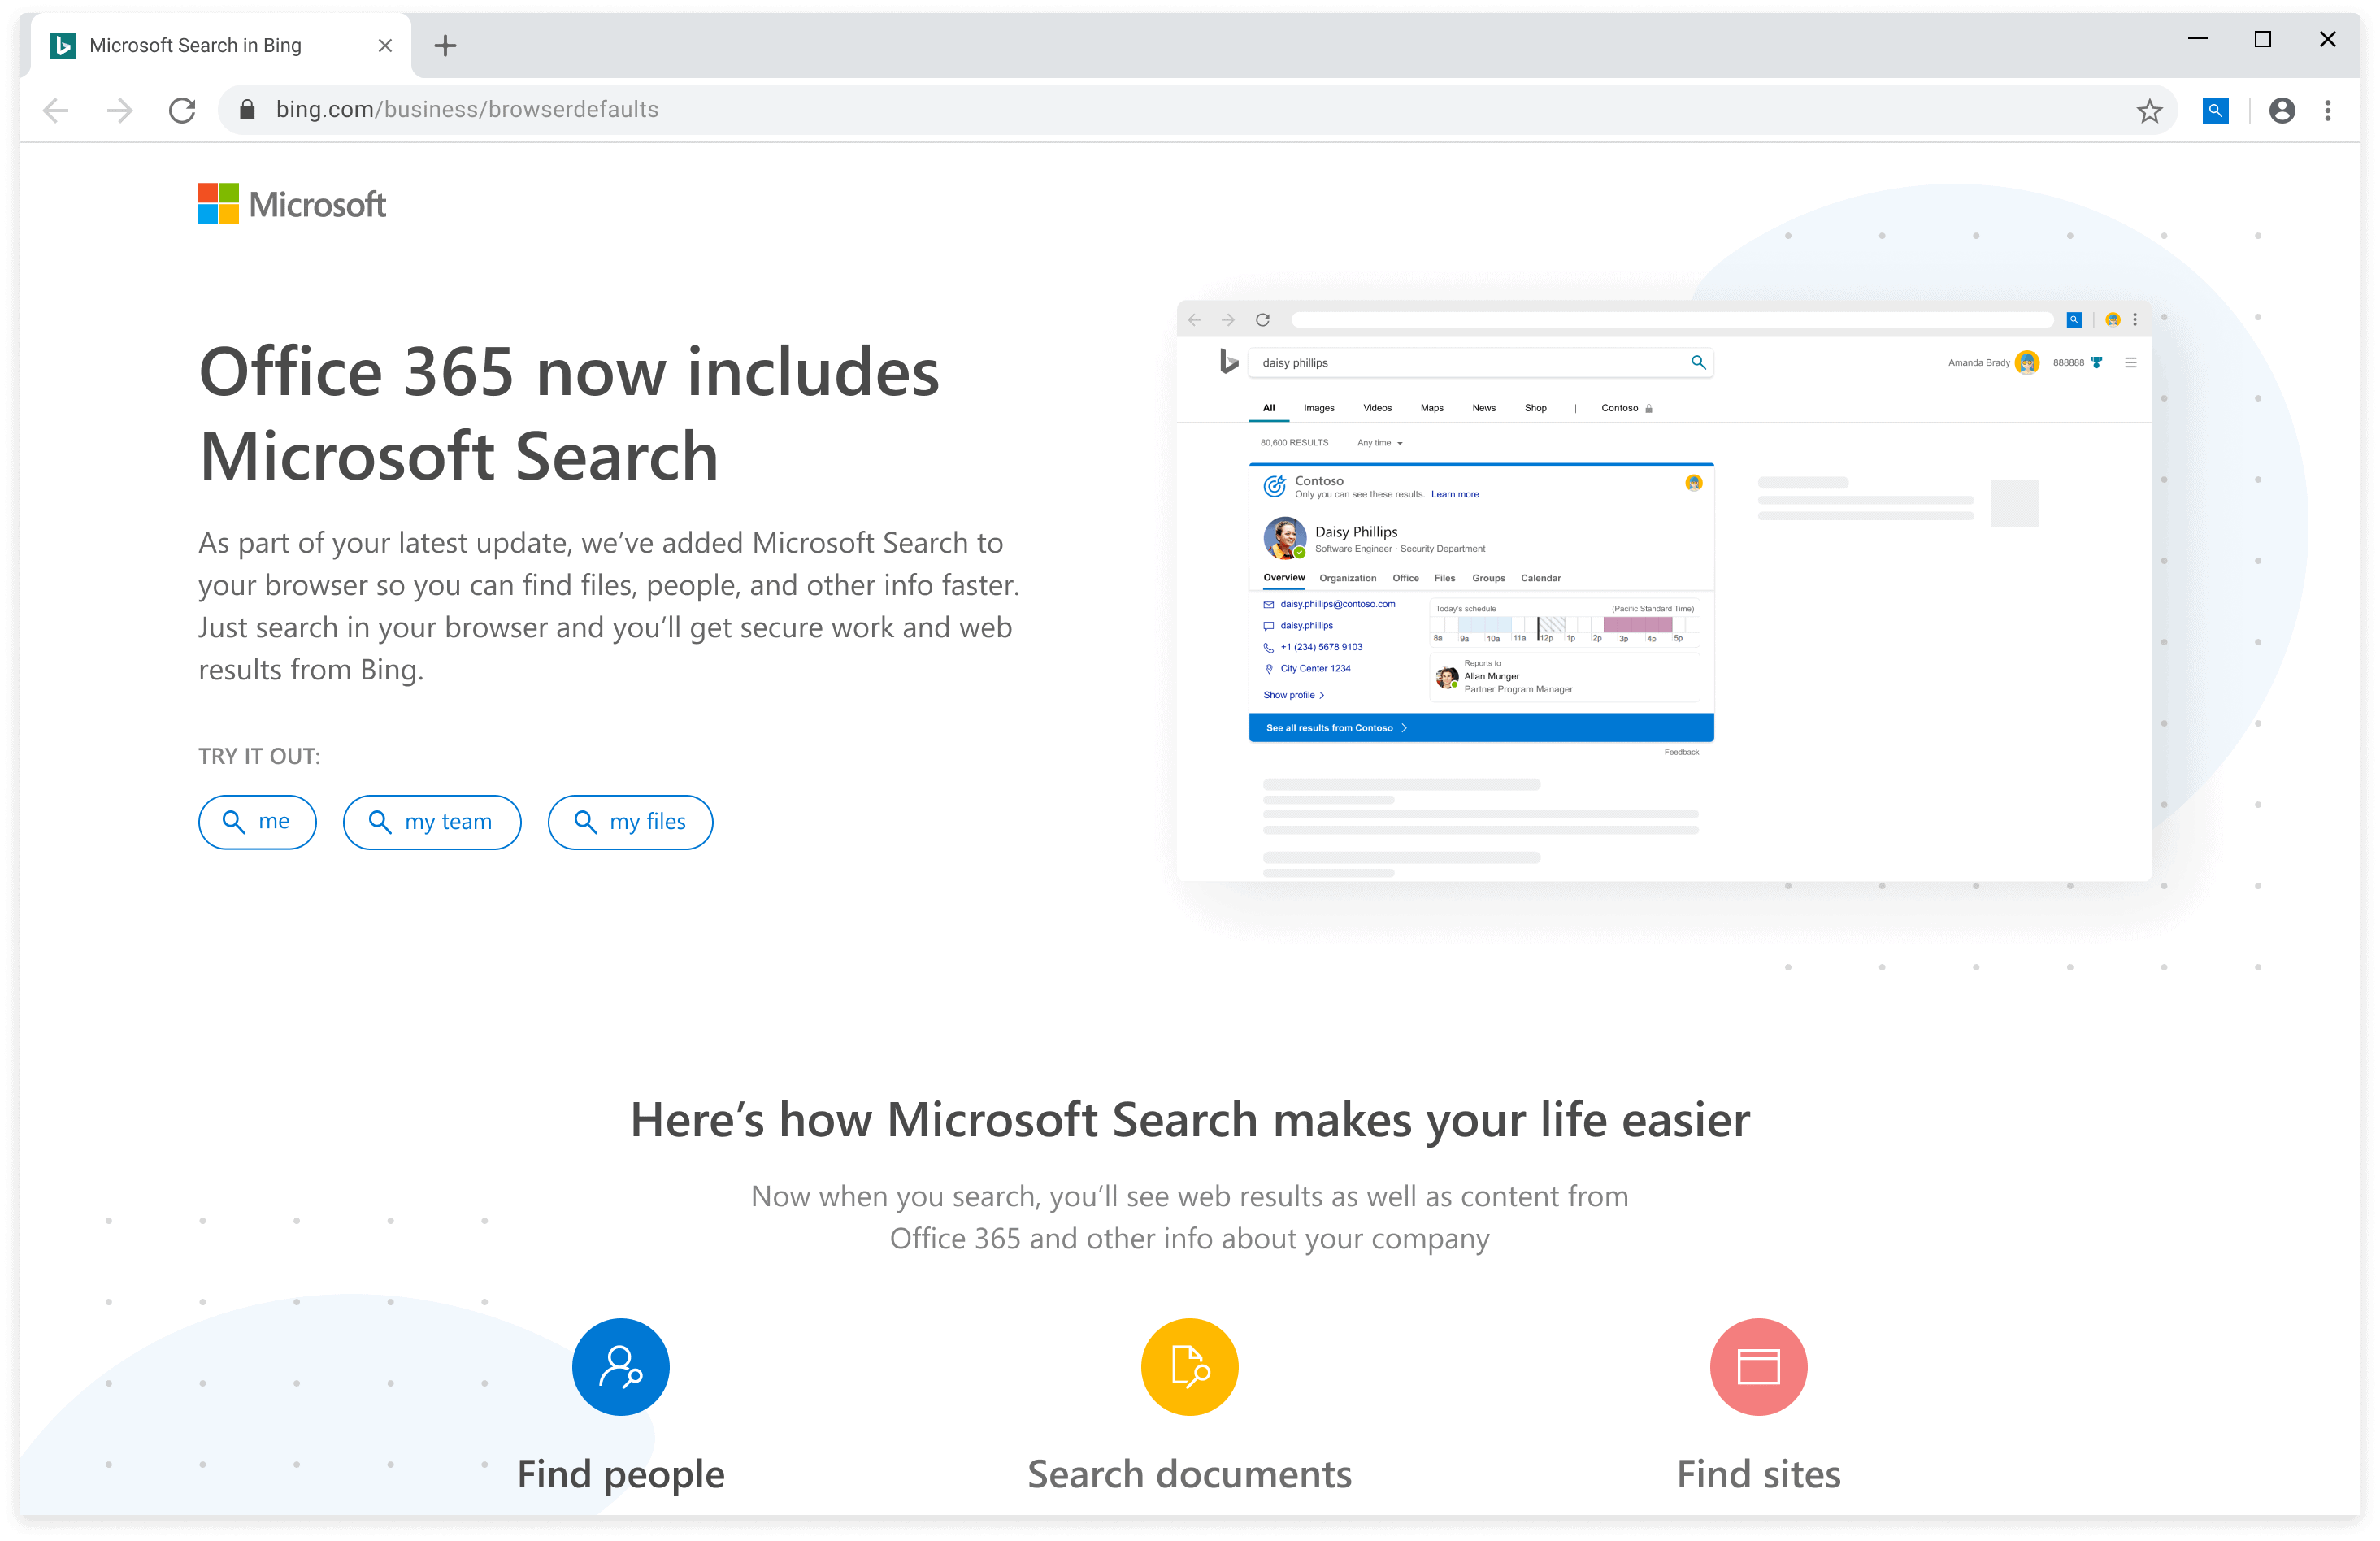 Microsoft will install a Bing Search extension in Chrome on some customer systems